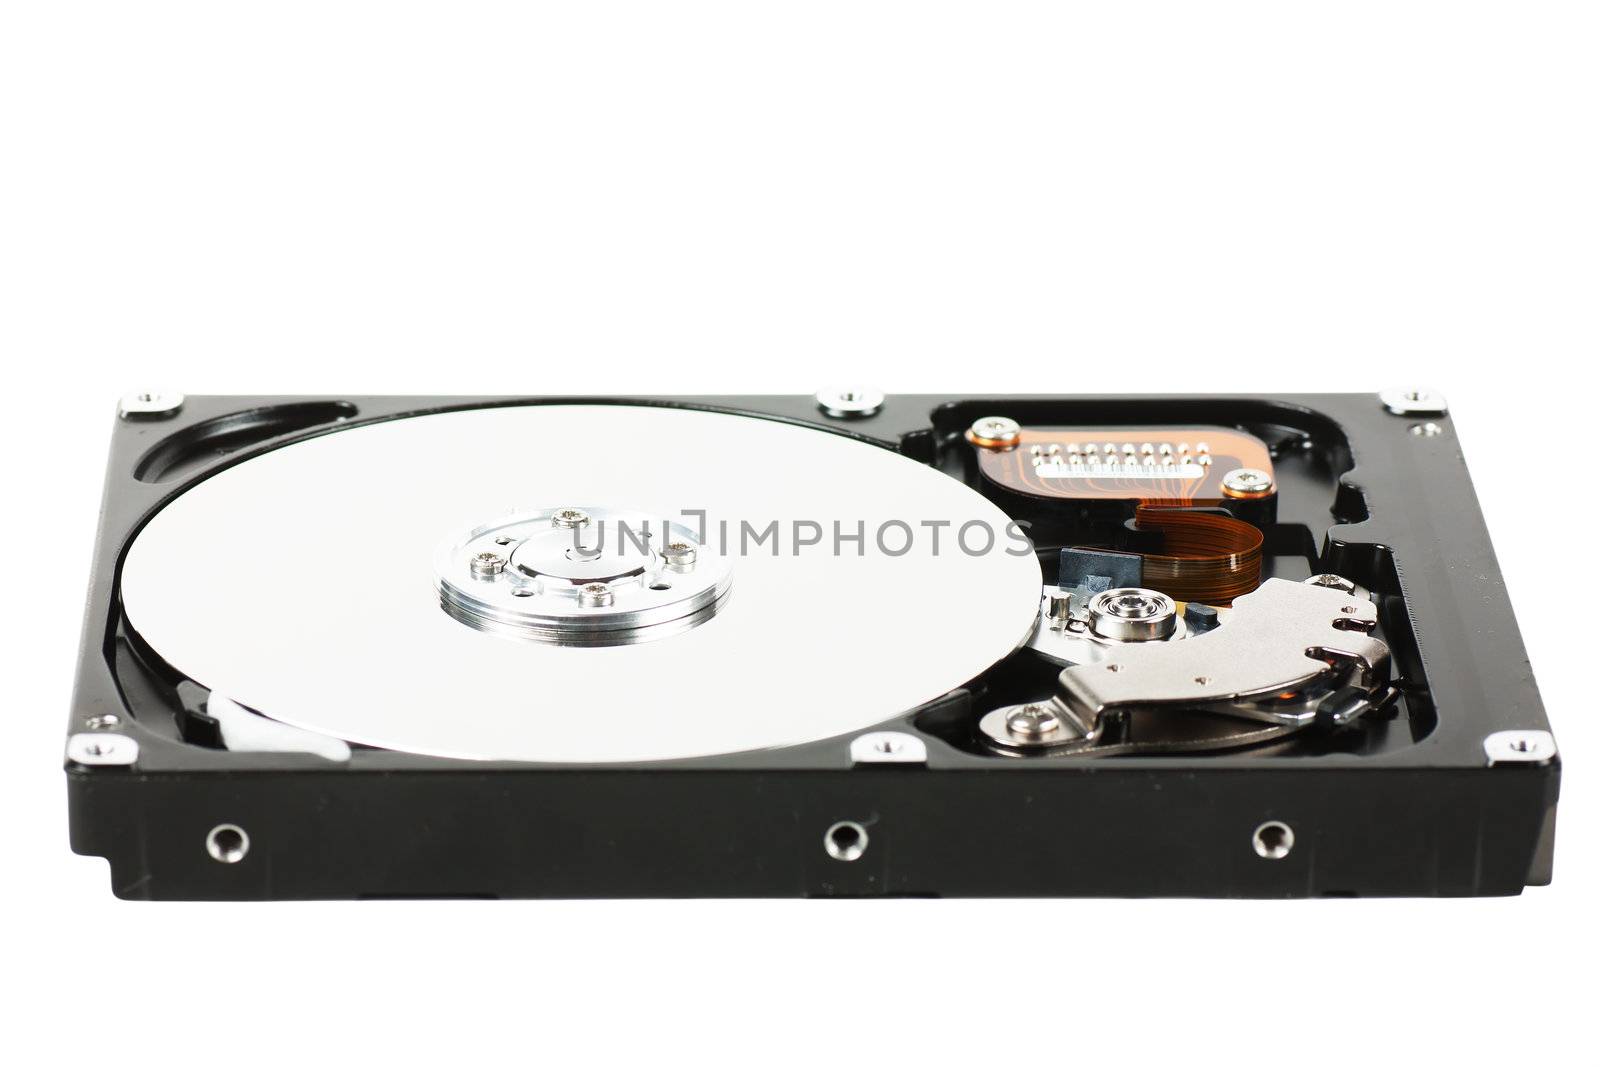 Computer component hard drive isolated over white